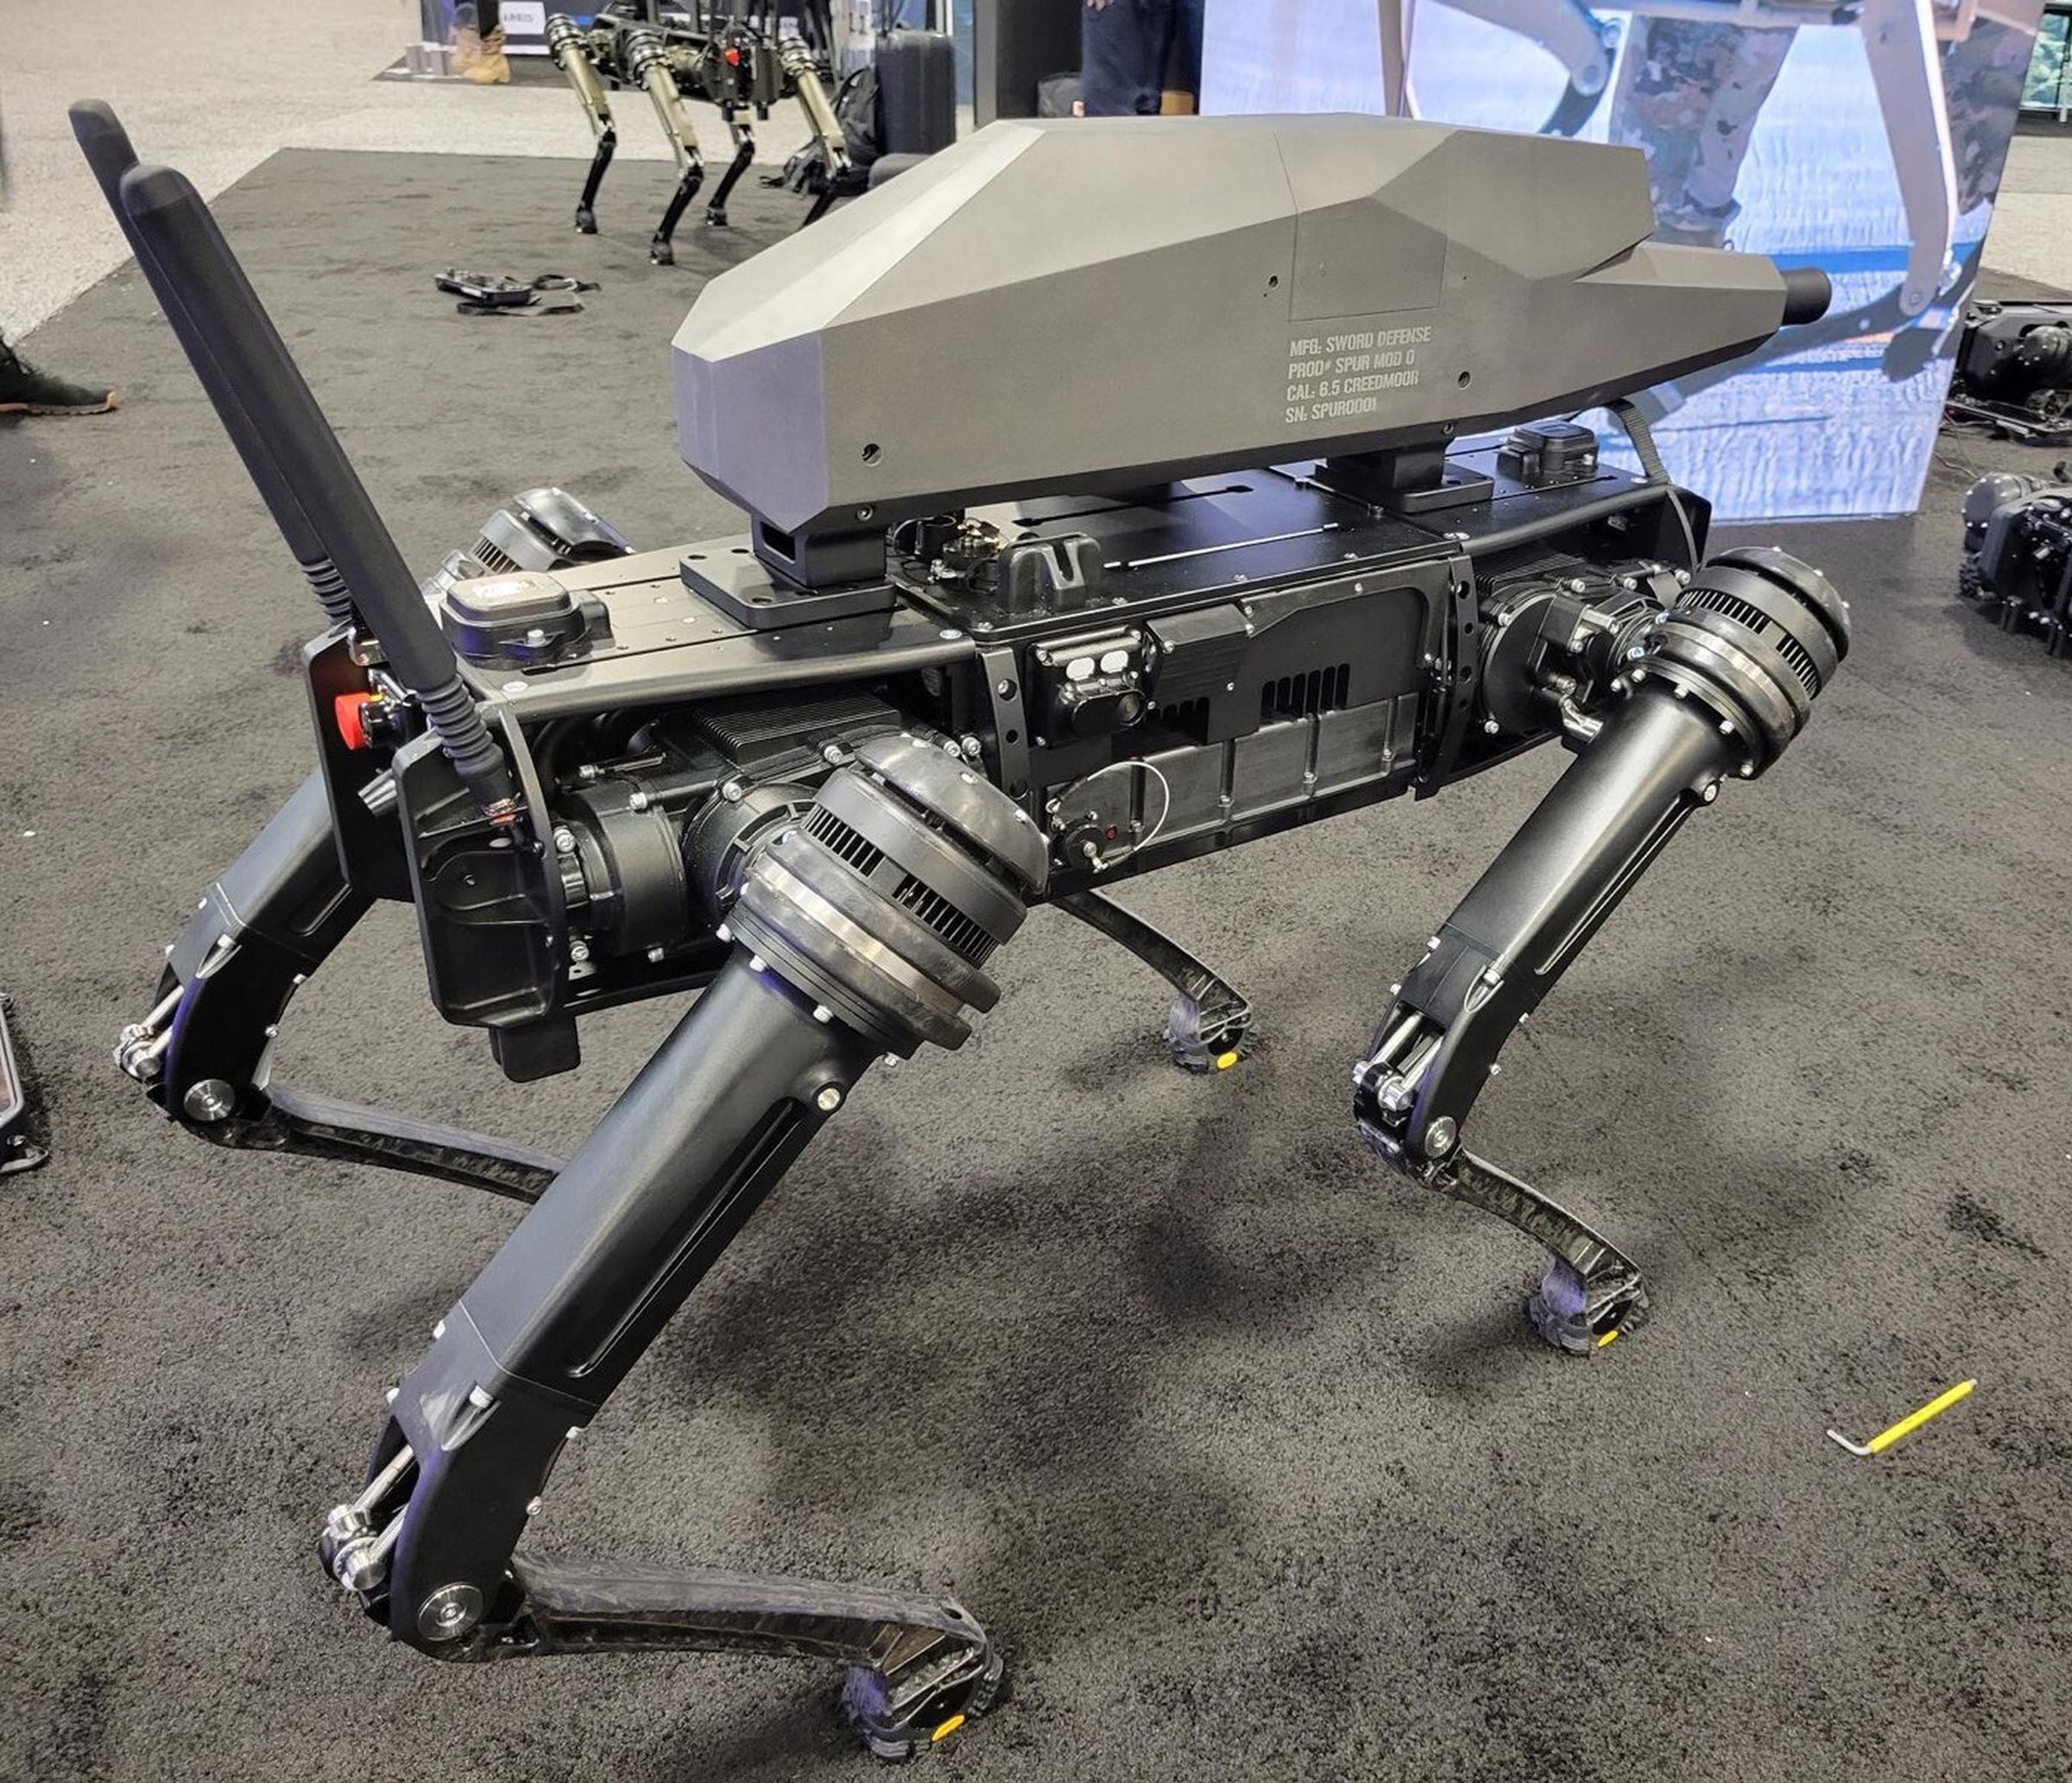 The robot base is built by Ghost Robotics, and carries a specially-designed gun built by Sword International. 